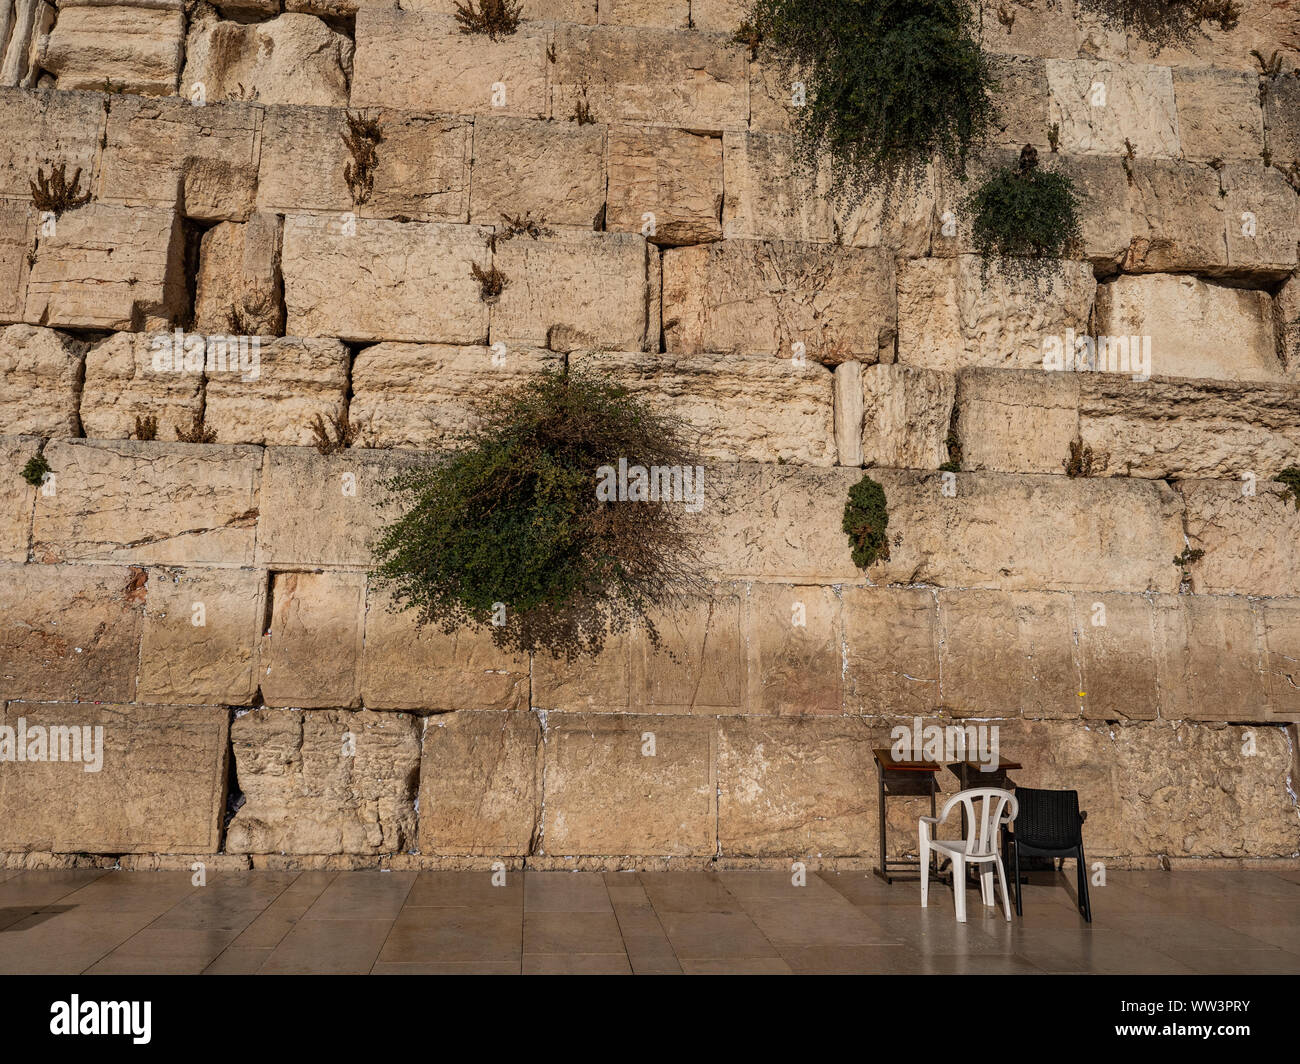 Israel historic religion Western Wall with two chairs for praying Stock Photo